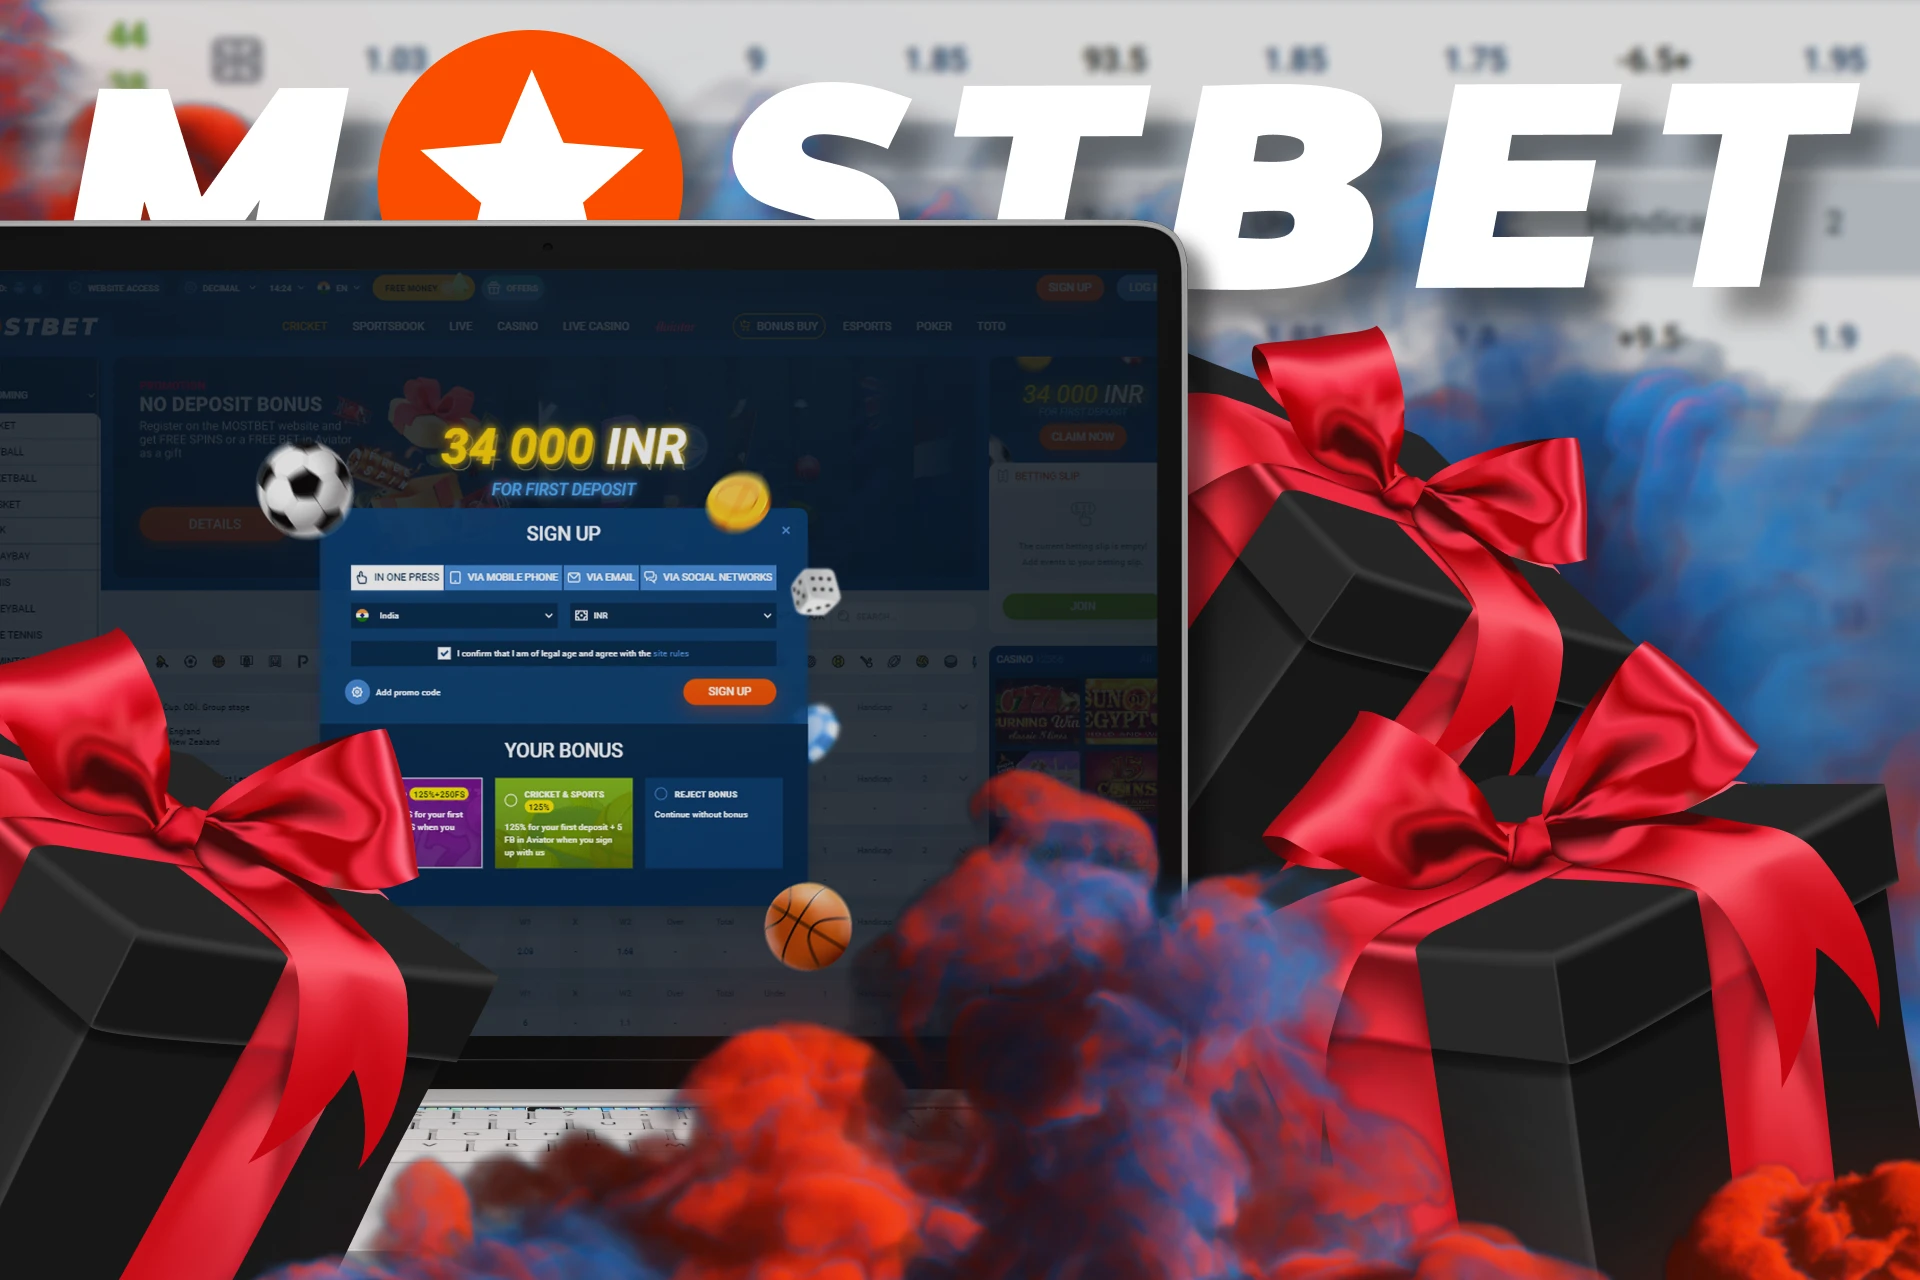 At Mostbet, you can get your first deposit tennis bonus during registration.